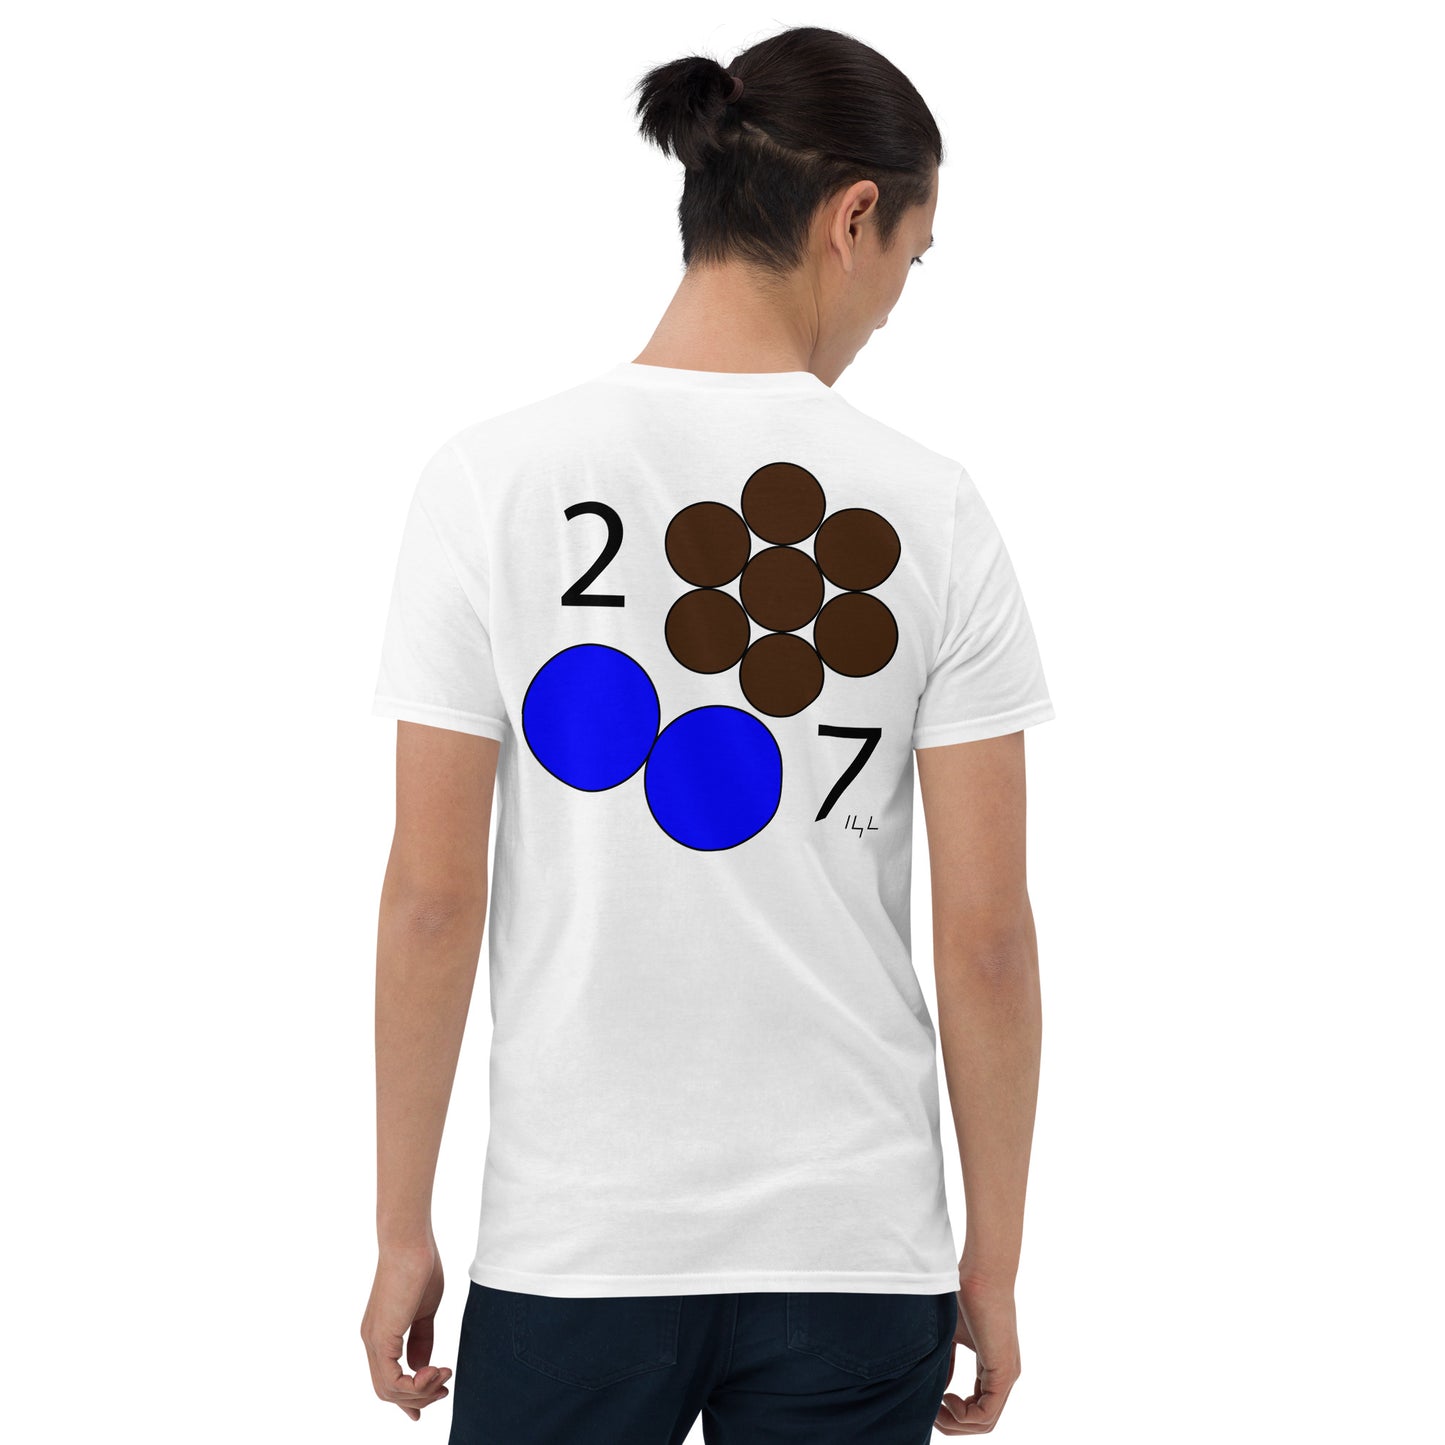 February 7th Blue T-Shirt at 2:07 0207 207